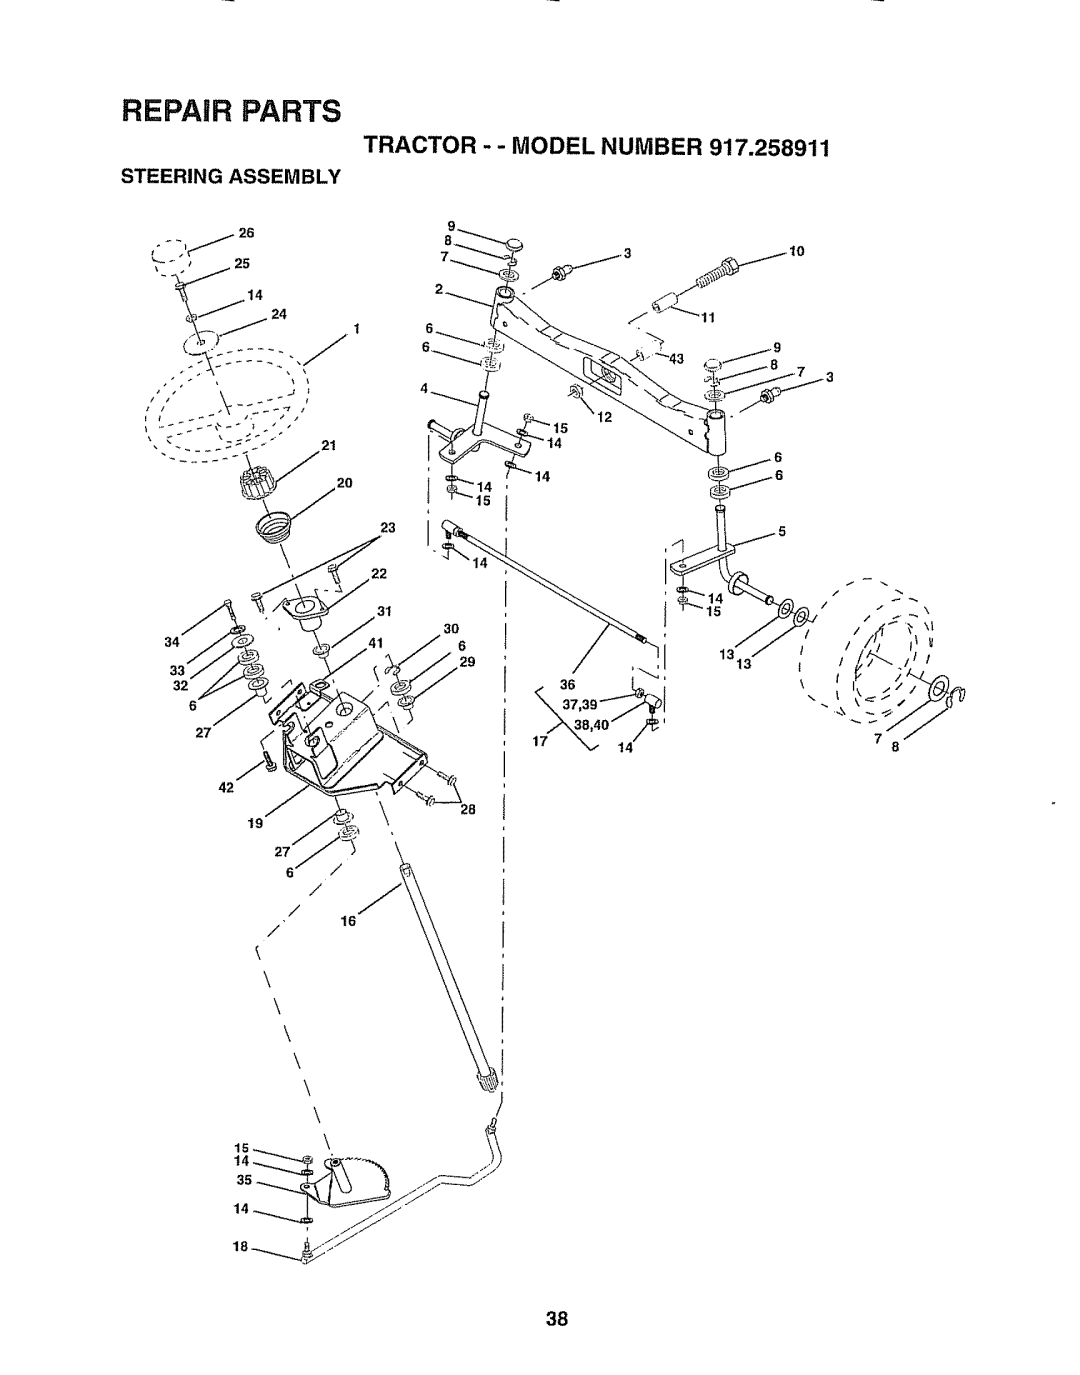 Craftsman 917.258911 owner manual Steering Assembly, Repair Parts, Tractor - - Model Number 